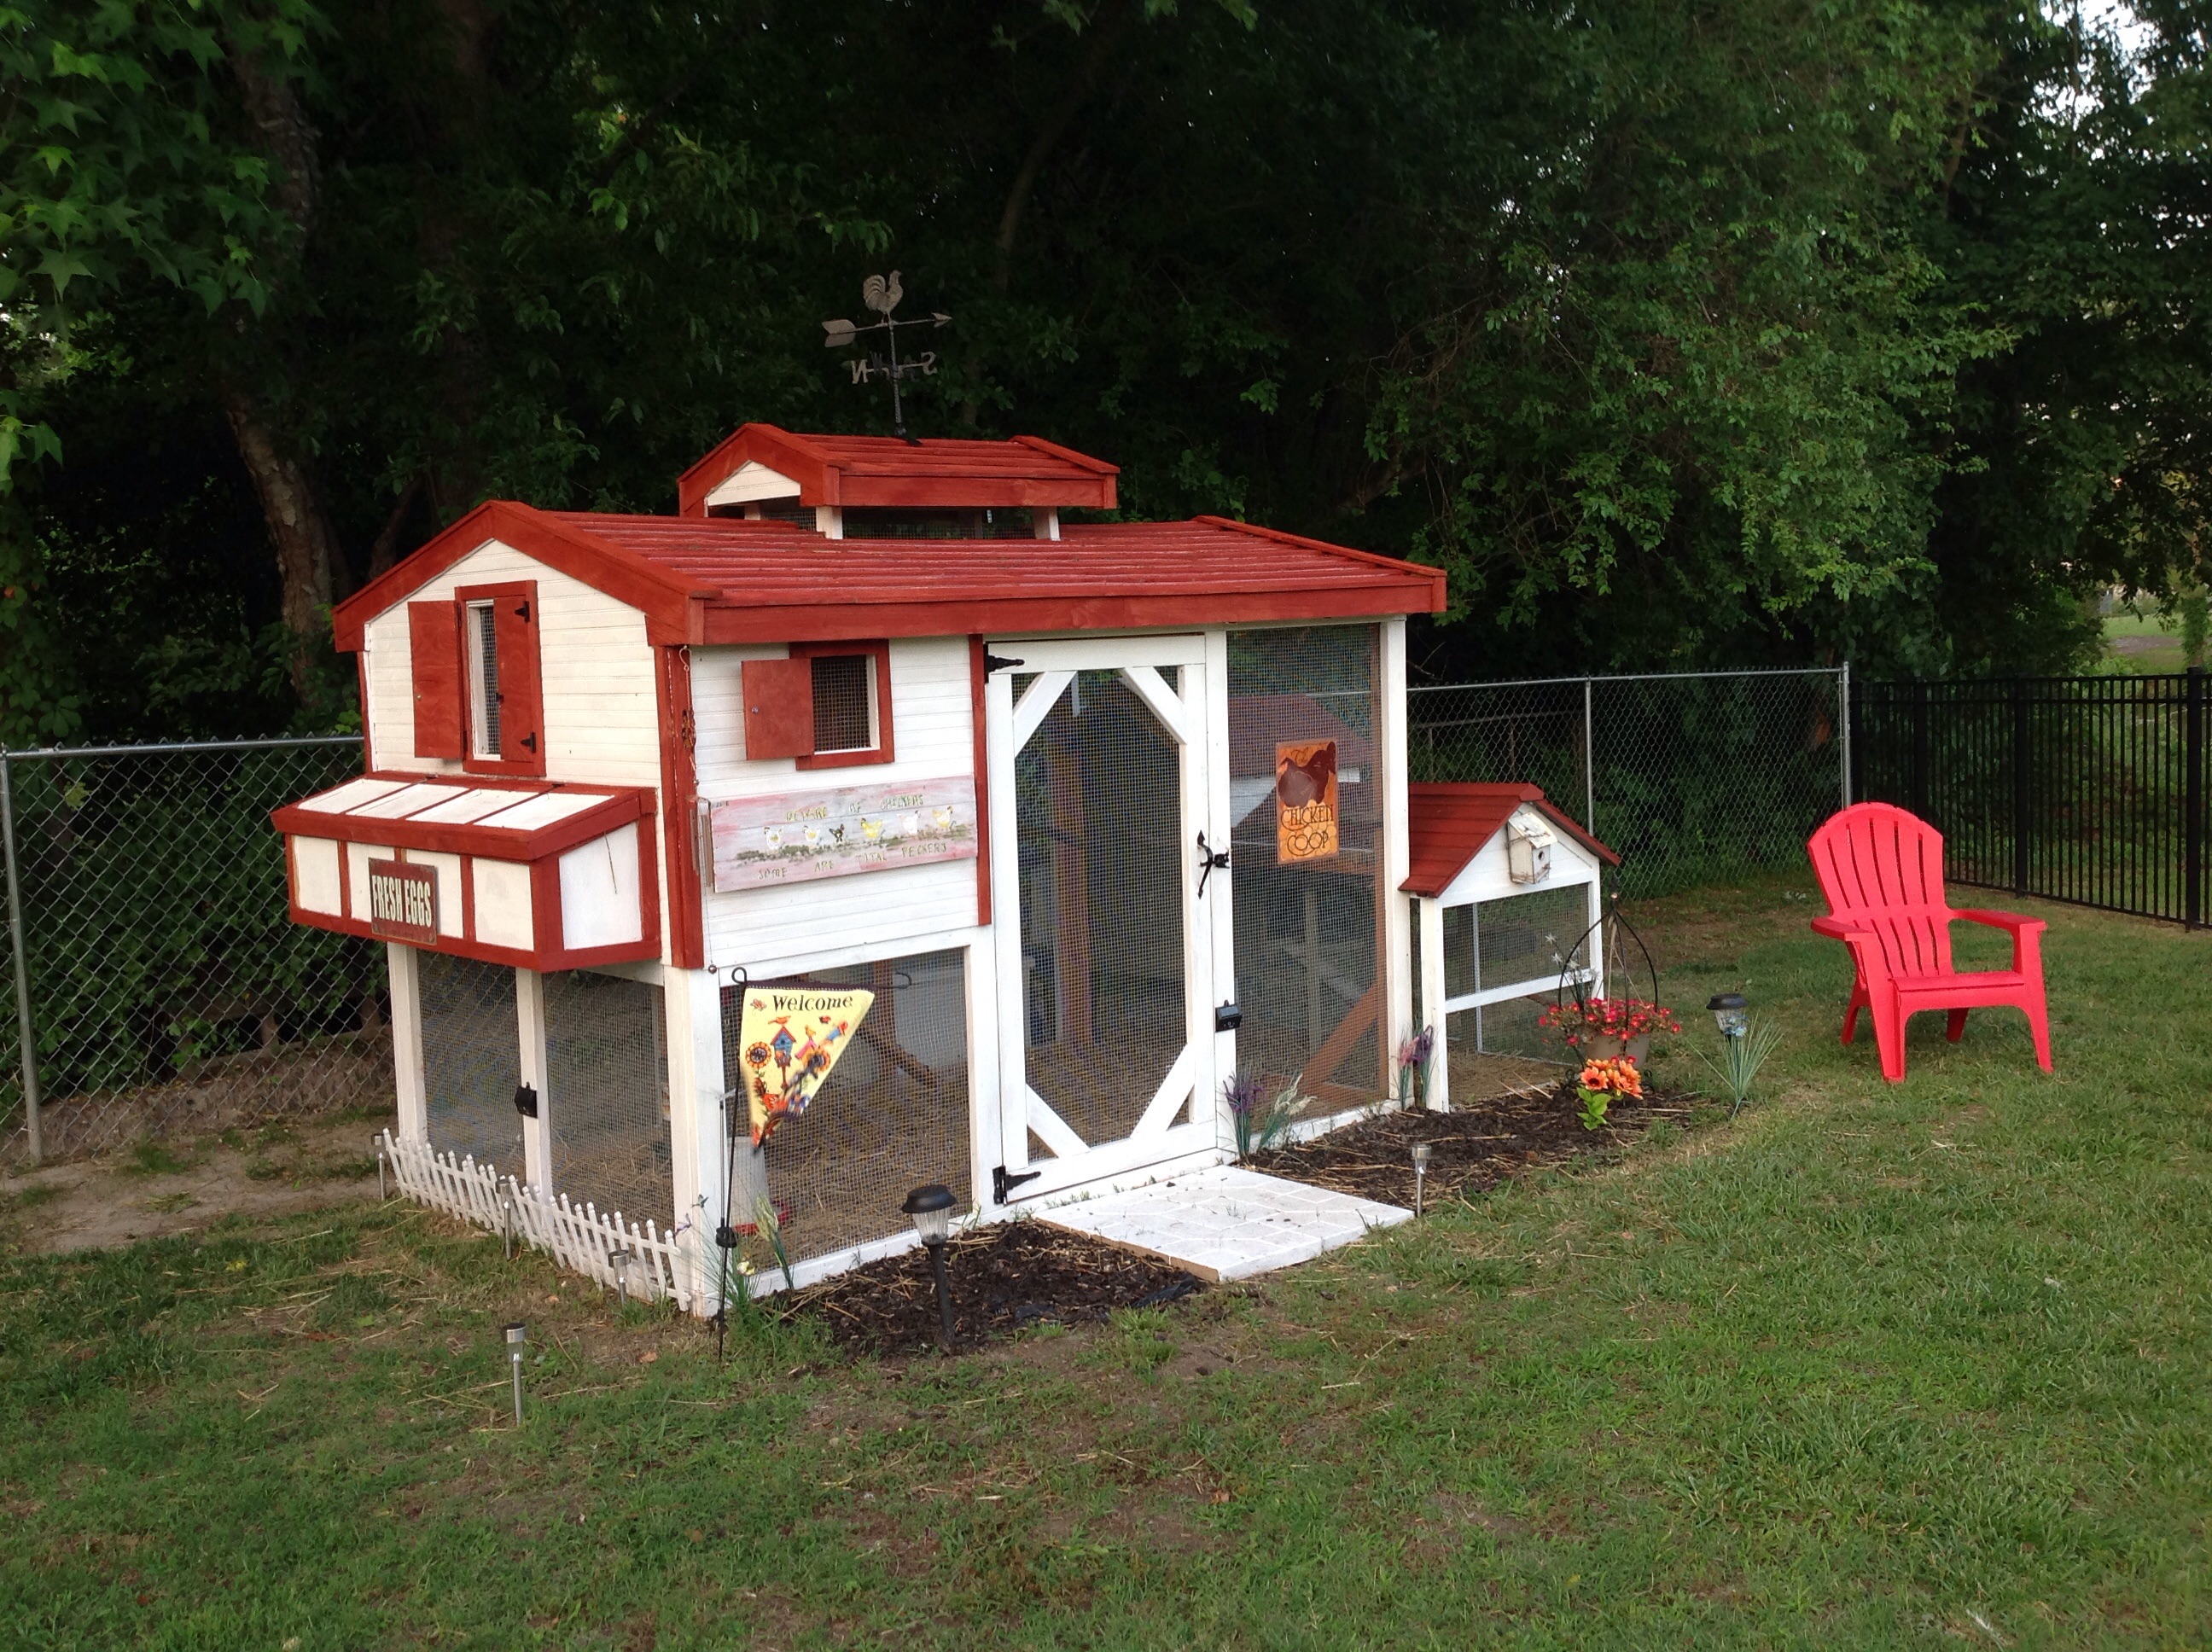 New coop for our 6 hens.  They are now 10 weeks old.